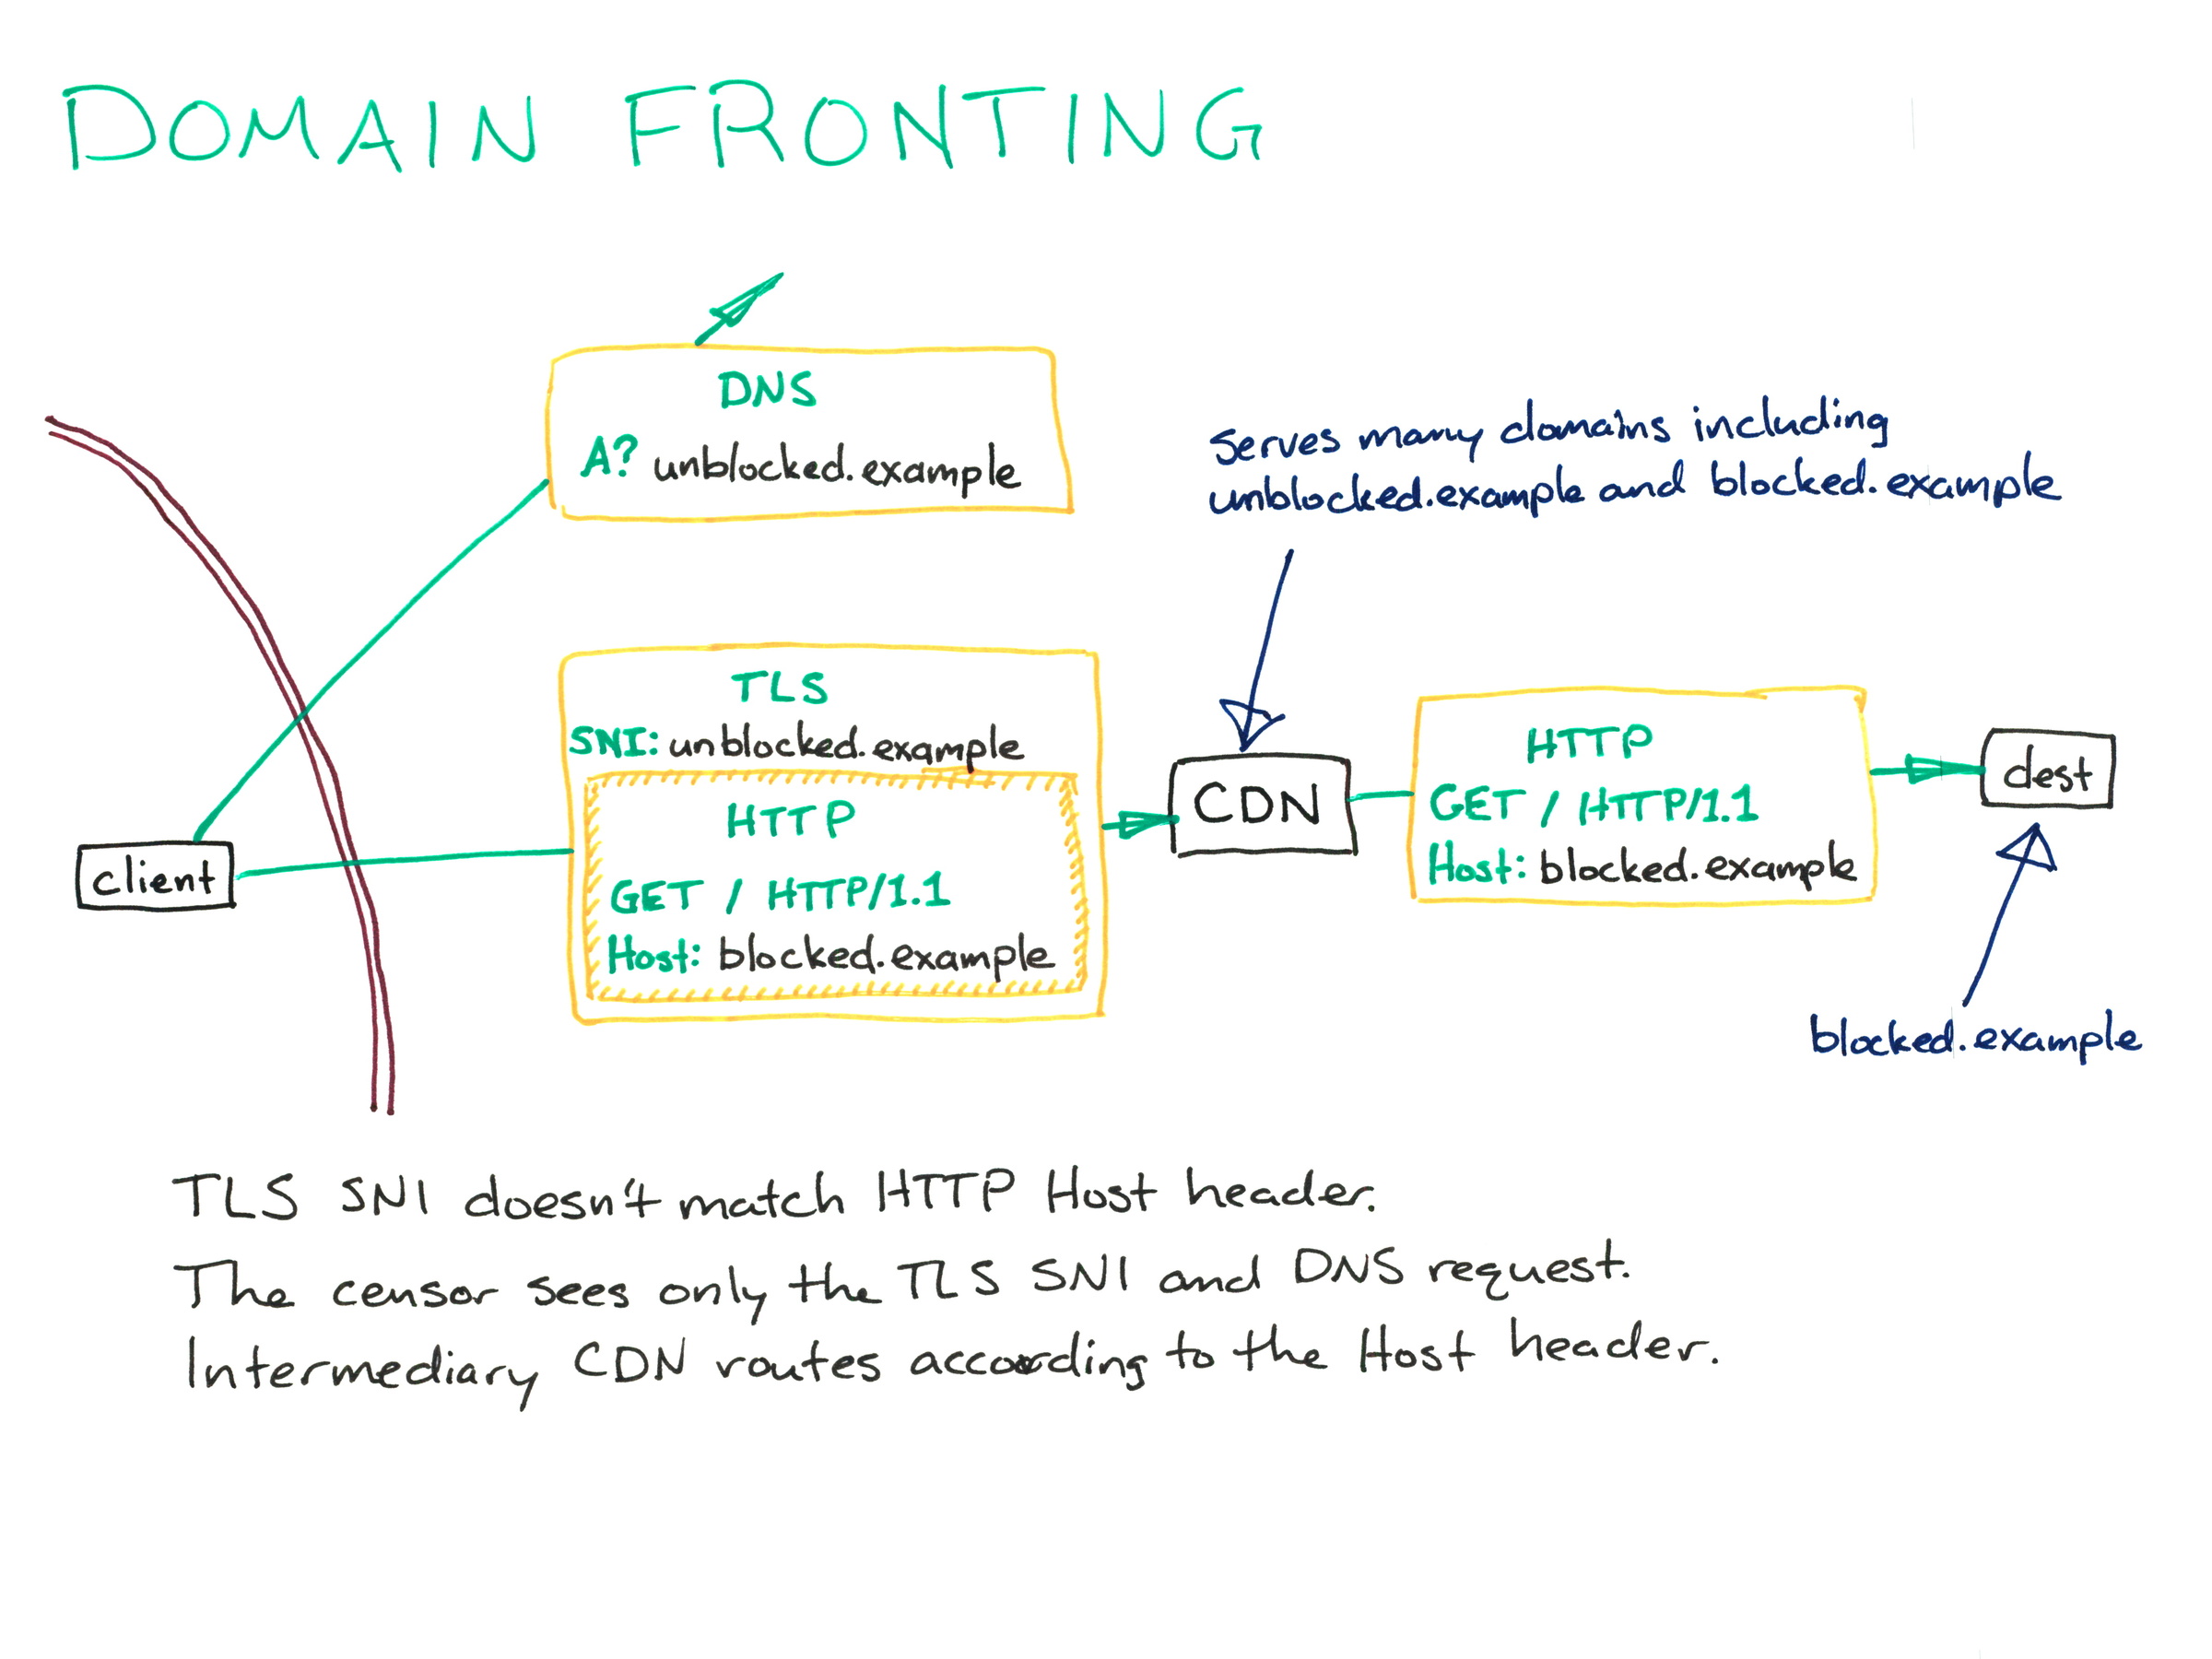 
DOMAIN FRONTING

[diagram of domain fronting]

TLS SNI doesn’t match HTTP Host header.
The censor sees only the TLS SNI and DNS request.
Intermediary CDN routes according to the Host header.
